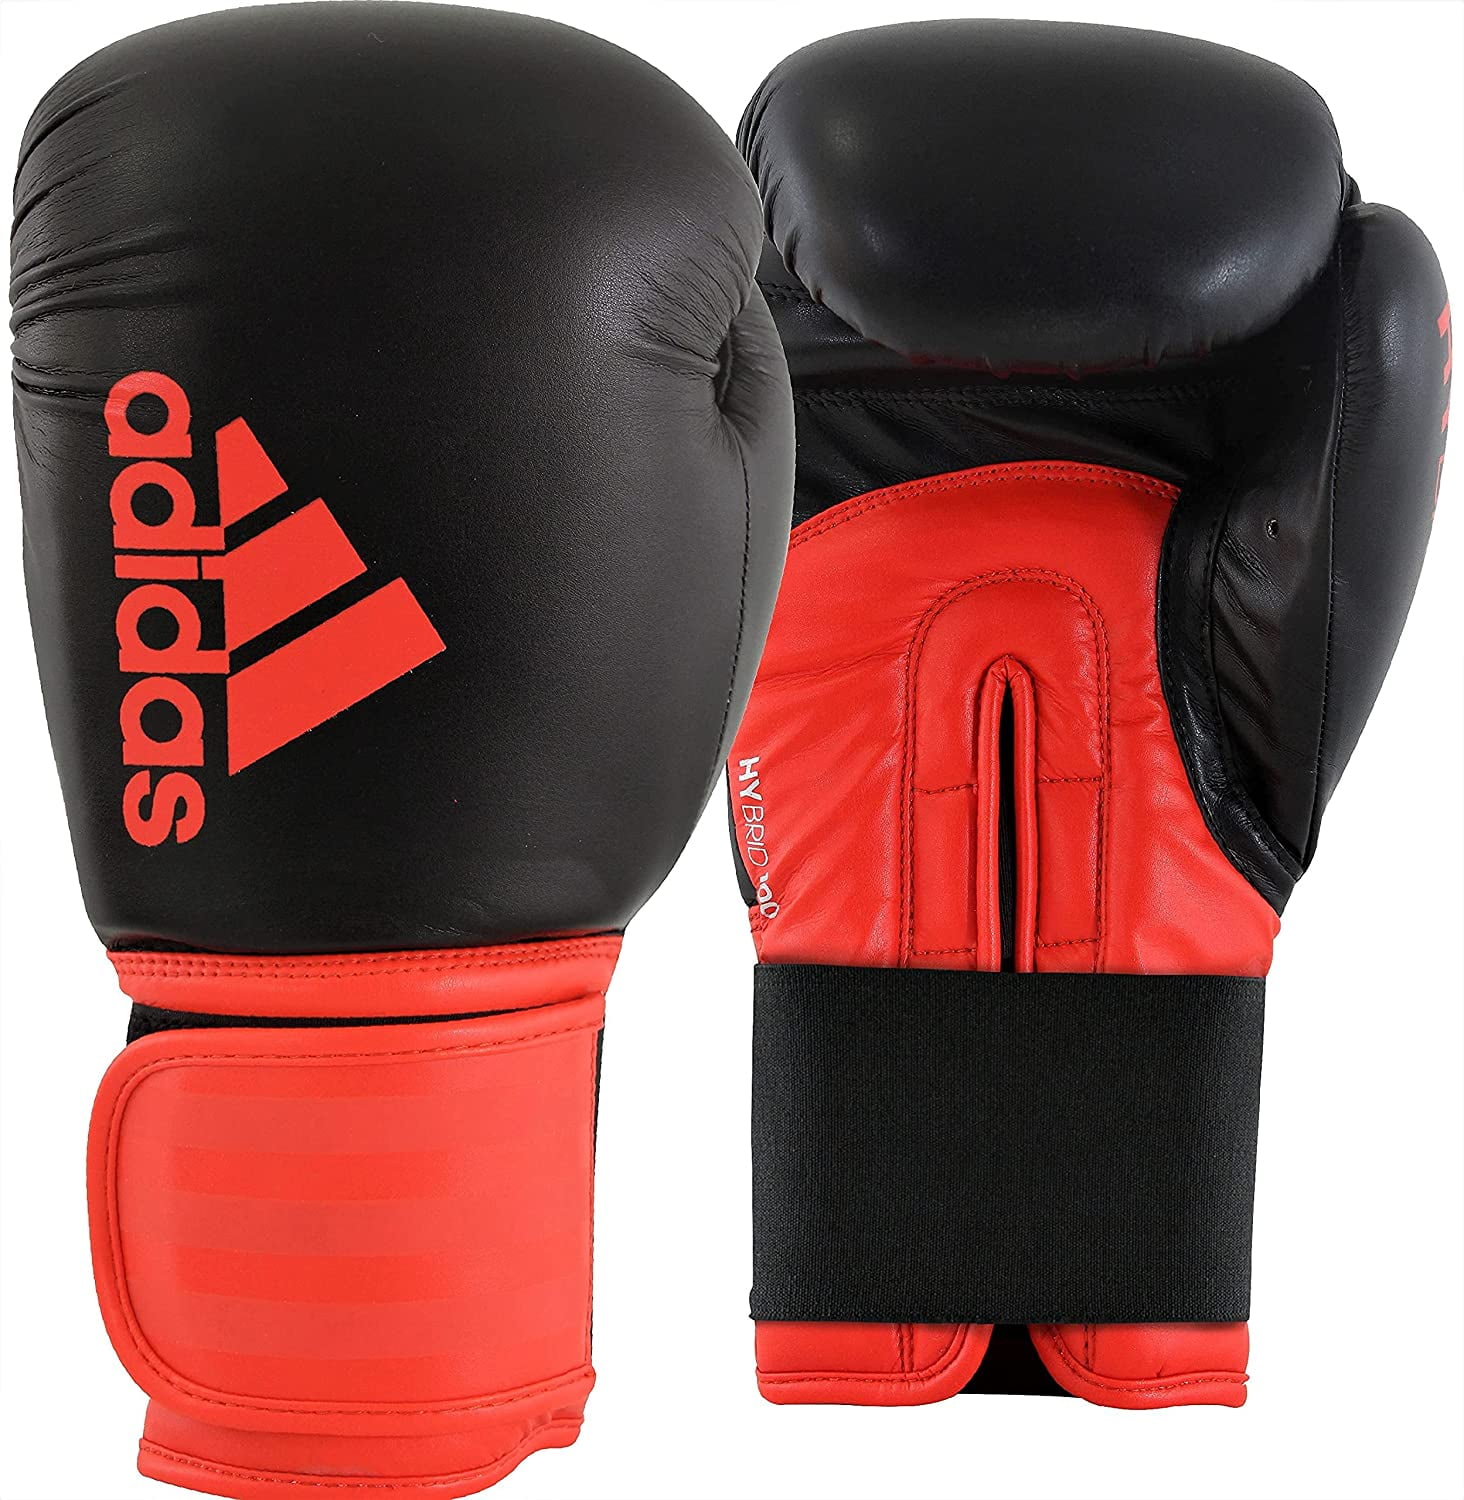 Adidas Boxing and Kickboxing Gloves - Hybrid 100 - for Men and Women - for  Punching, Fitness and Heavy Bags - Black/White, 16oz